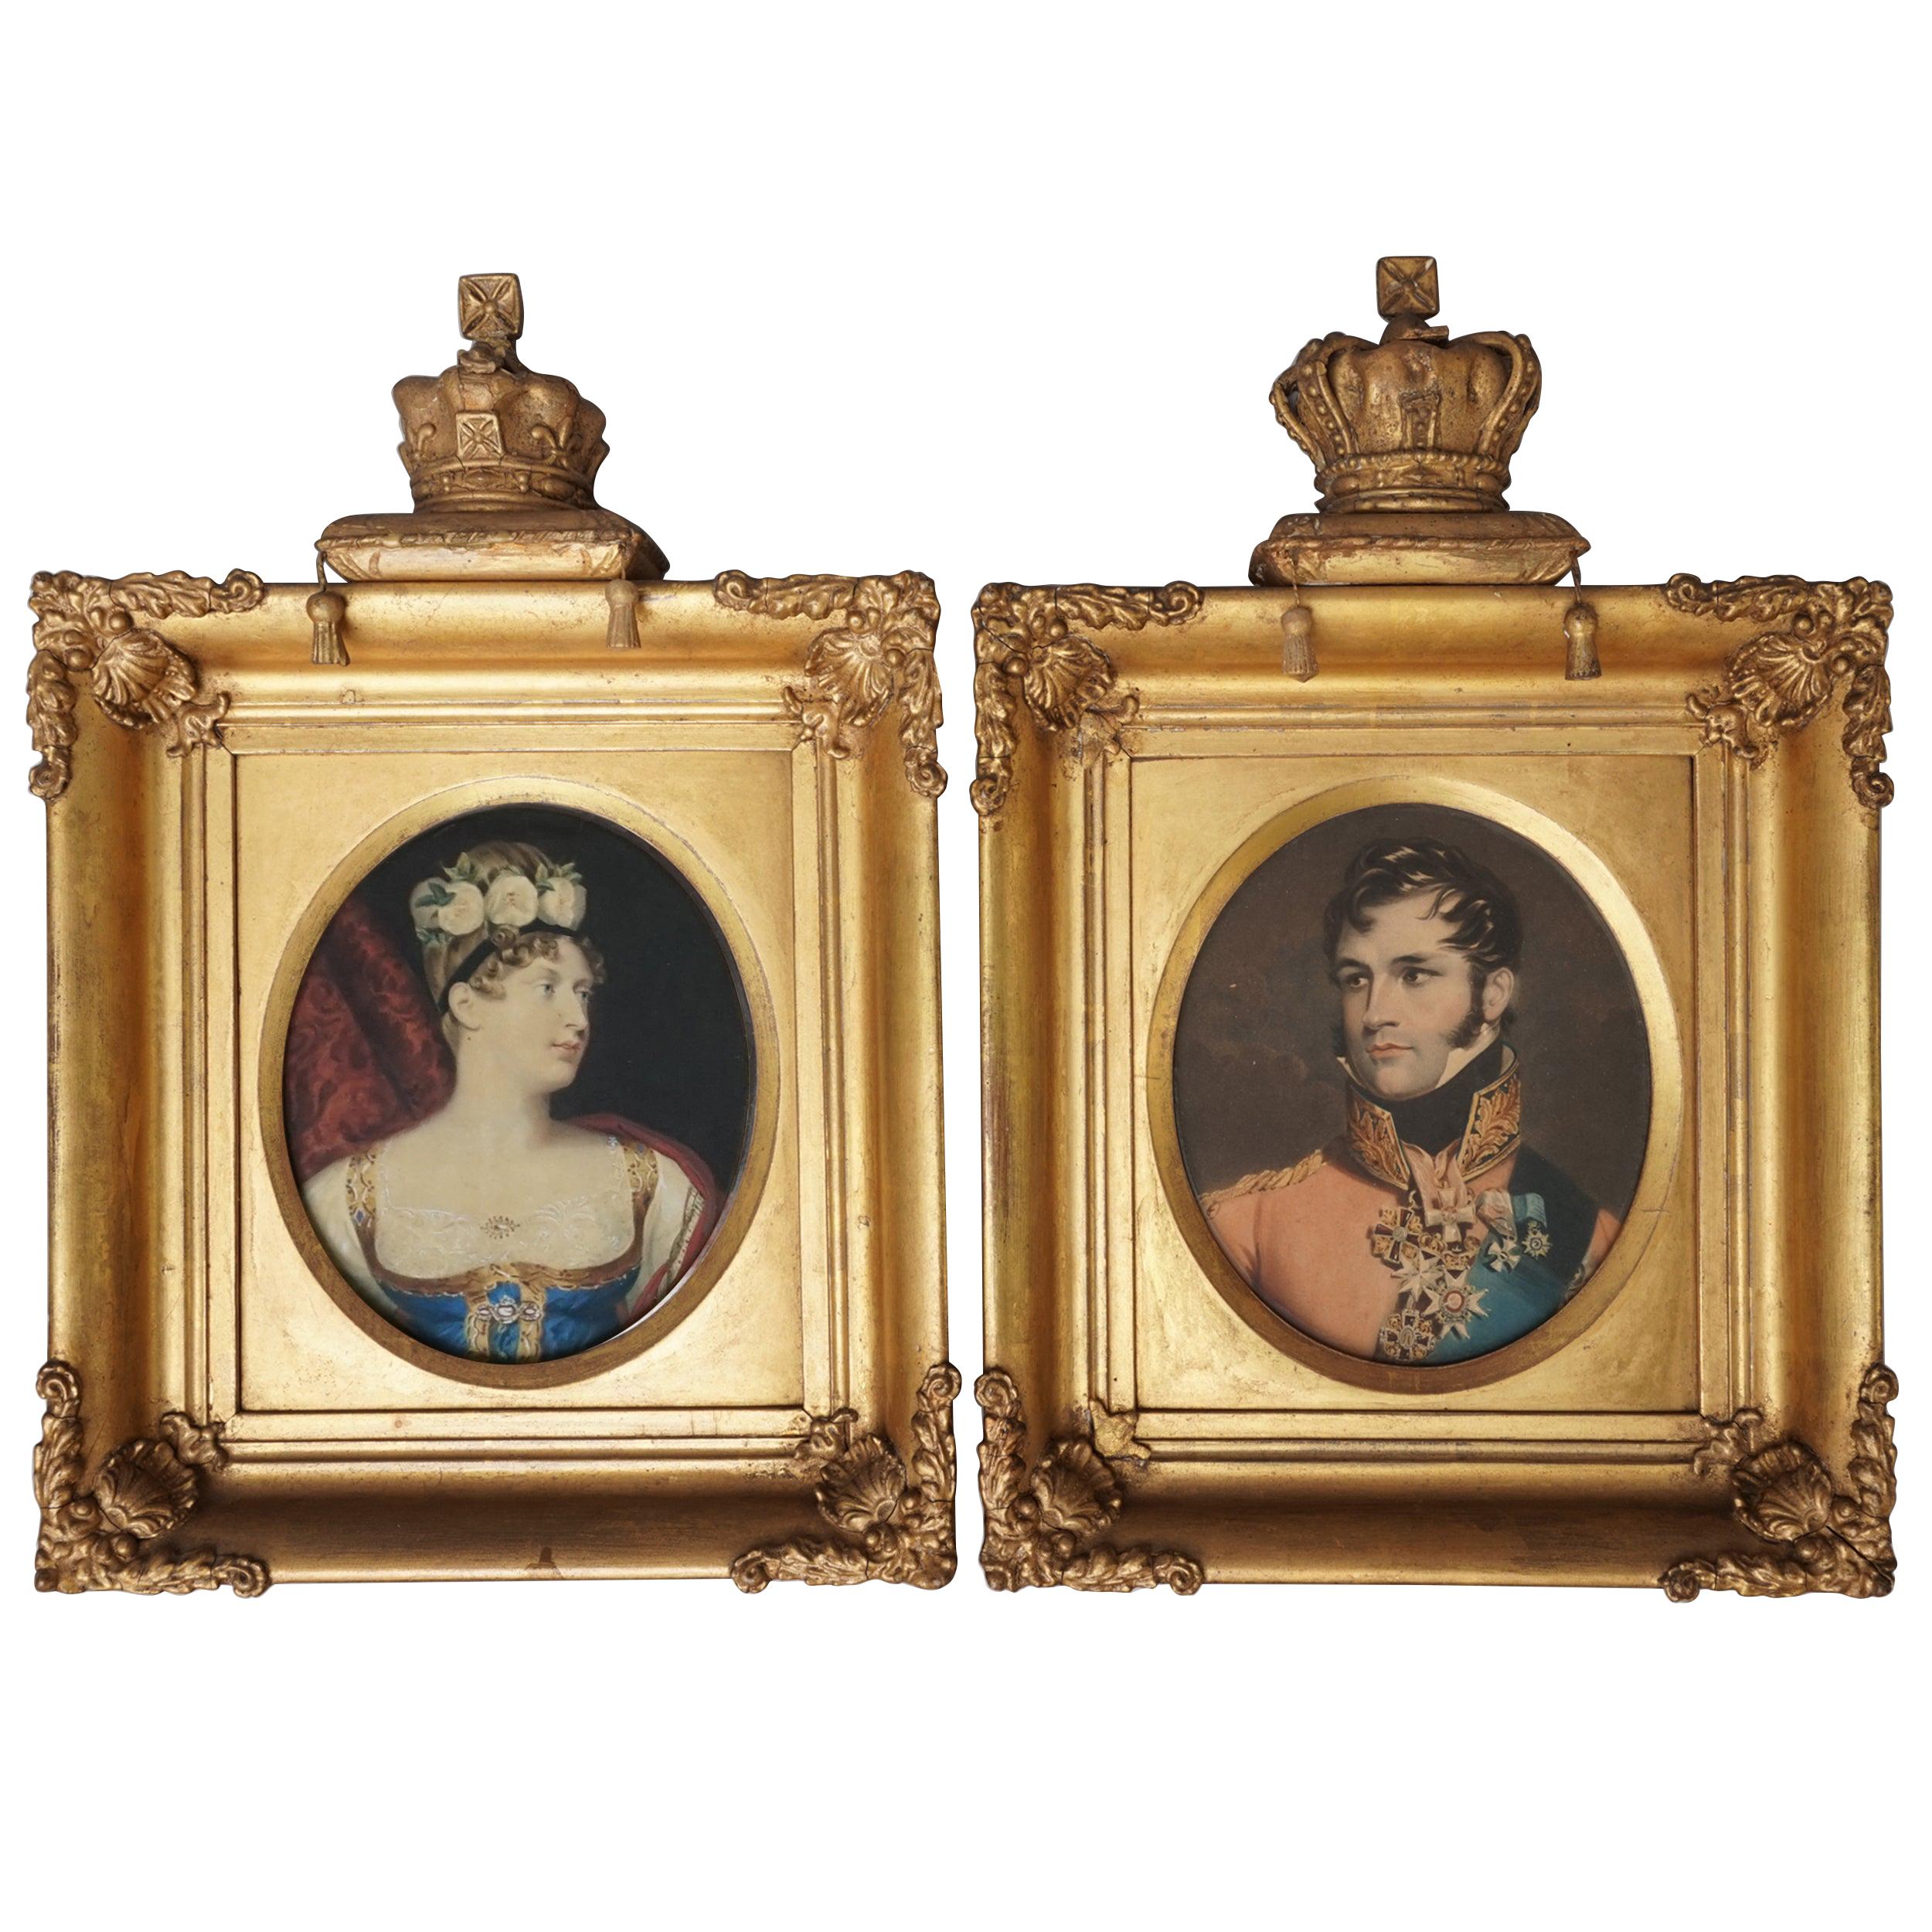 Mezzotint Portraits of Princess Charlotte and Prince Leopold's Marriage